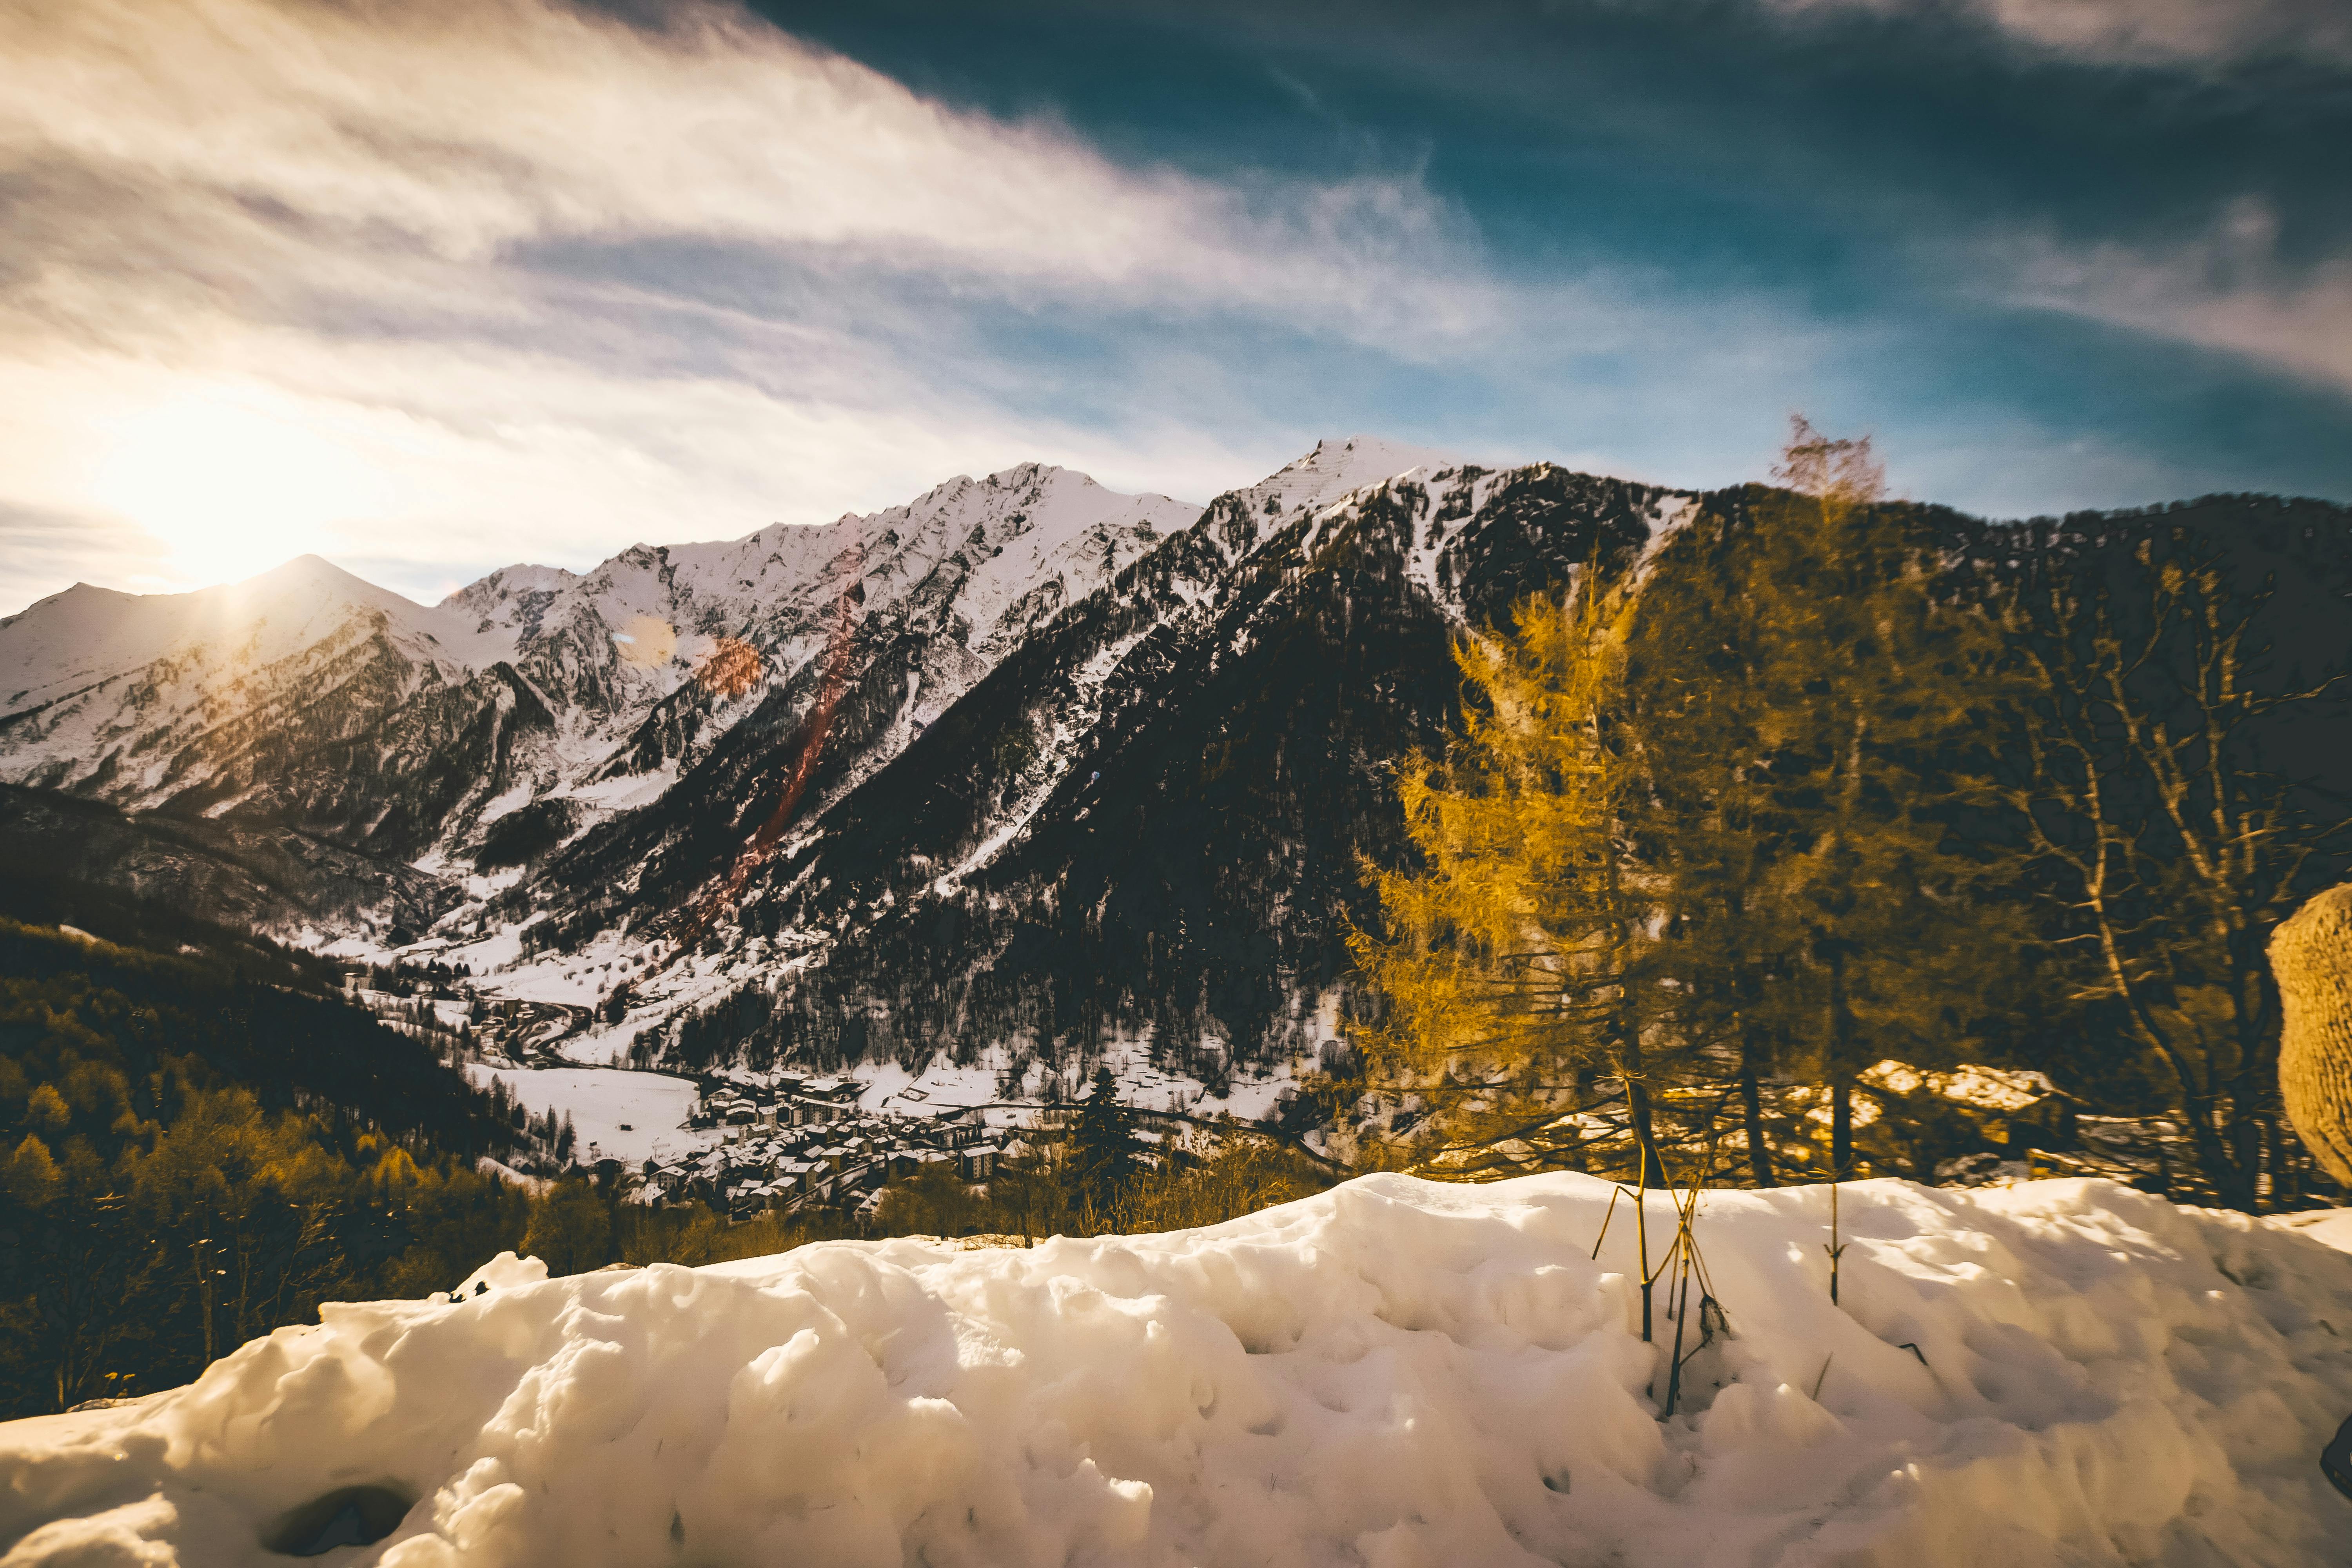 Landscape Photography of Snow Capped Mountain Range · Free Stock Photo